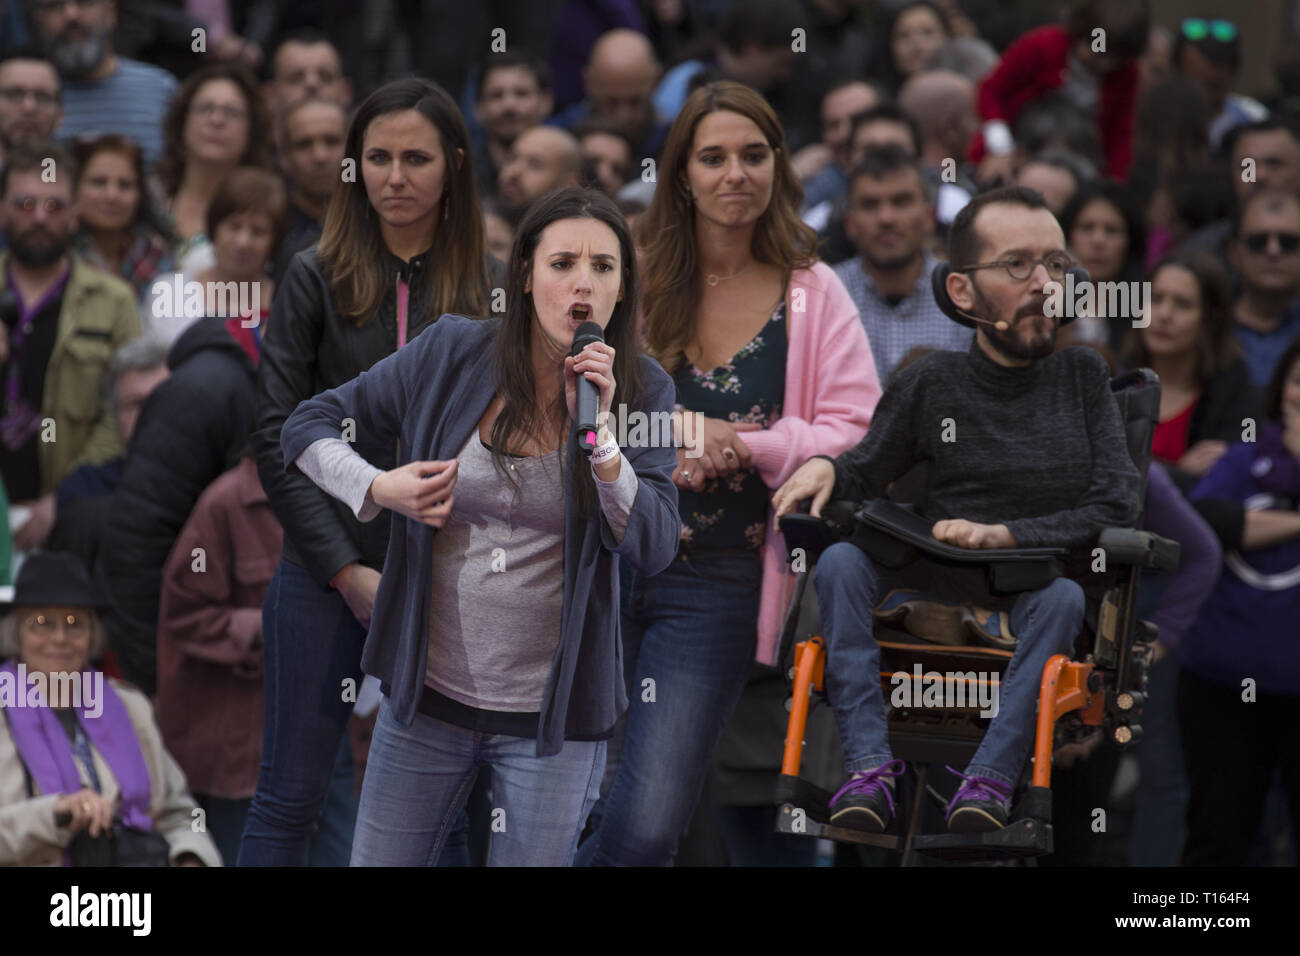 Madrid, Spain. 23rd Mar, 2019. Irene Montero, deputy of Unidos Podemos, seen speaking during the rally.Hundreds of people gathered at the rally of Podemos ''He returns'' (Vuelve in Spanish) as an act of pre-election campaign after the return of the party leader, Pablo Iglesias. During the rally, different members of the Unidos Podemos group participated. Credit: Lito Lizana/SOPA Images/ZUMA Wire/Alamy Live News Stock Photo